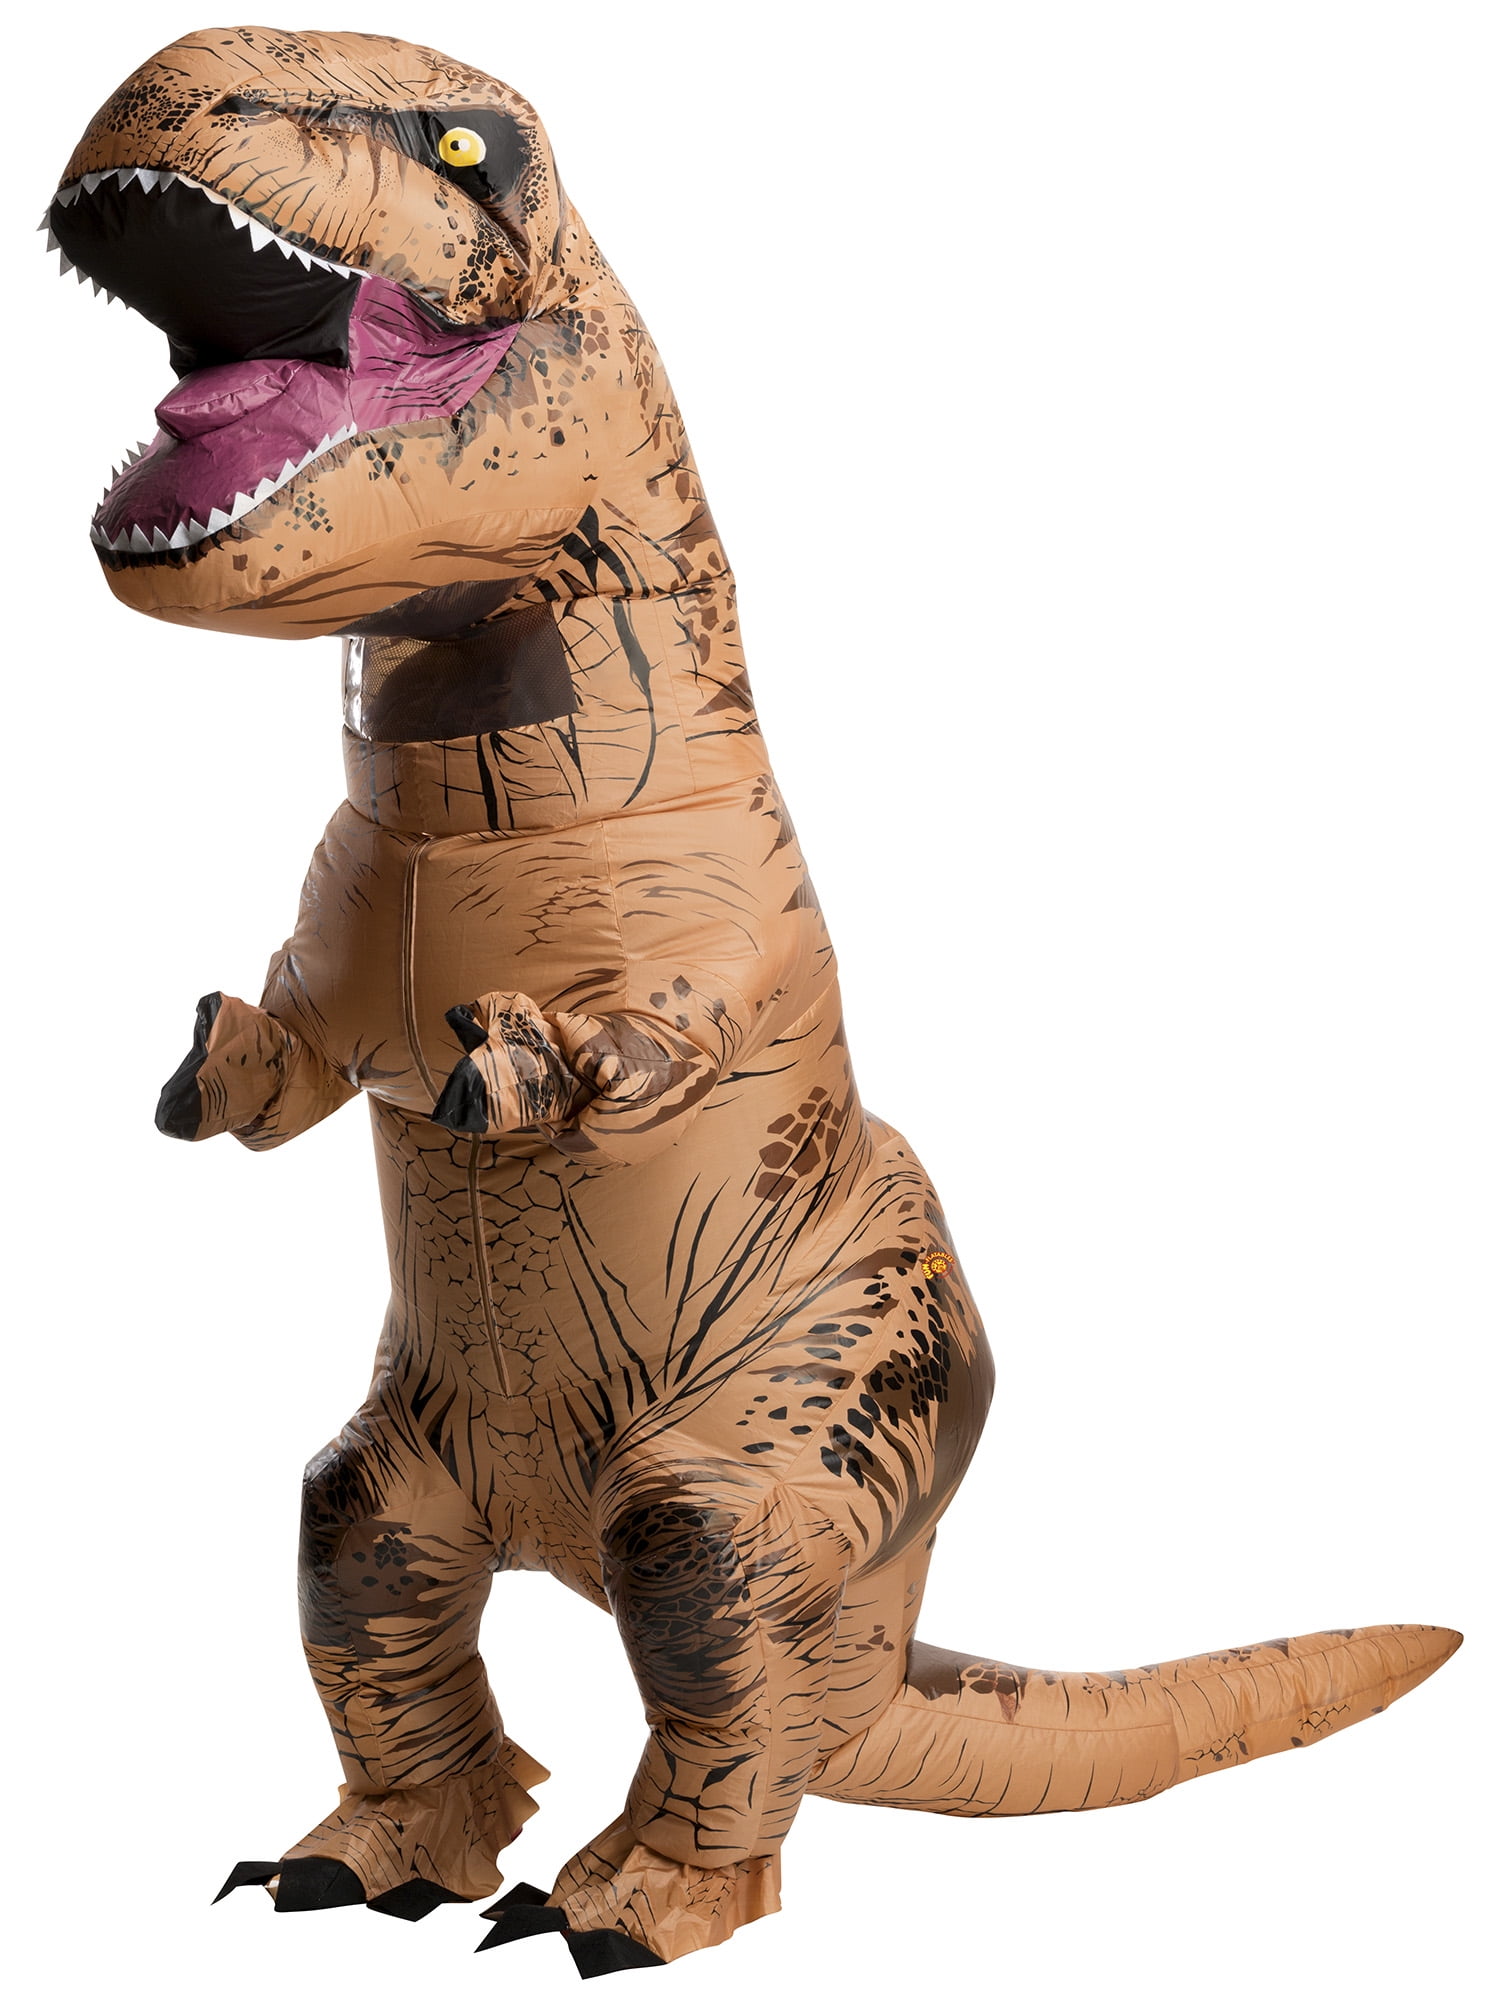 Rubies Inflatable Jurassic World T-Rex Adult Costume, Brown, One Size